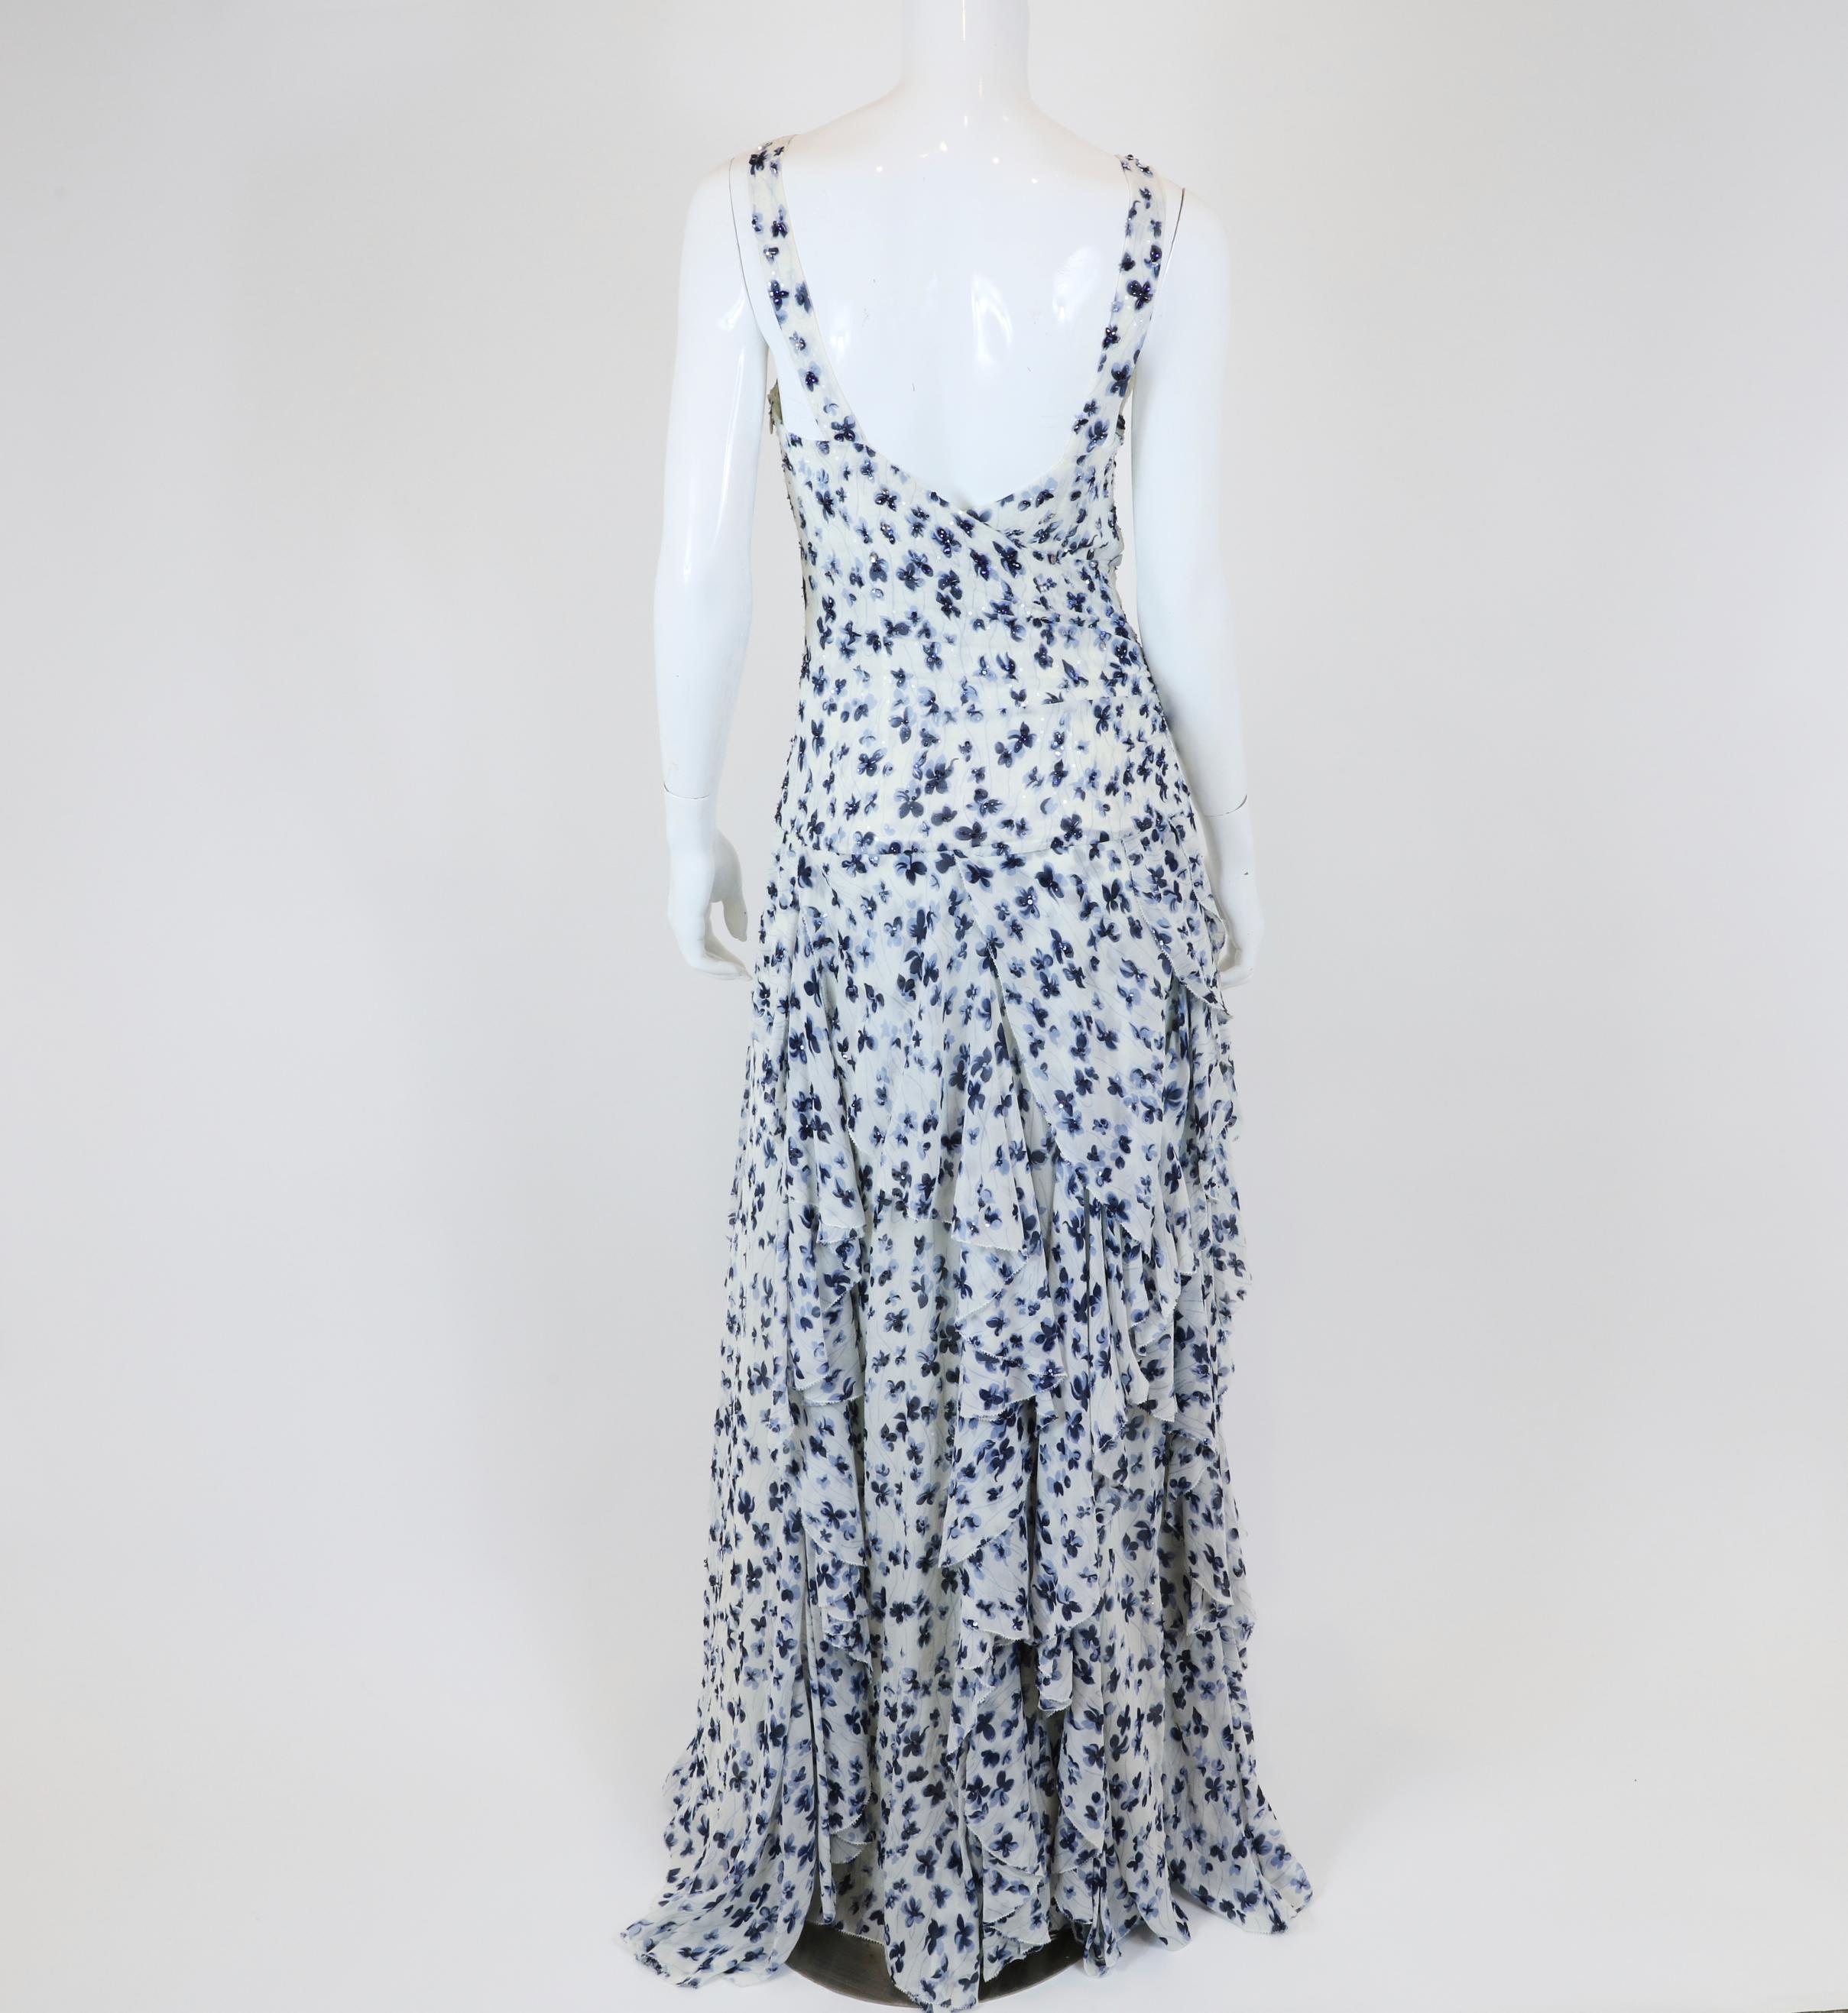 Women's Ralph Lauren Collection Blue & White Dress
Spaghetti strapped gown with tiered ruffles
New with tags